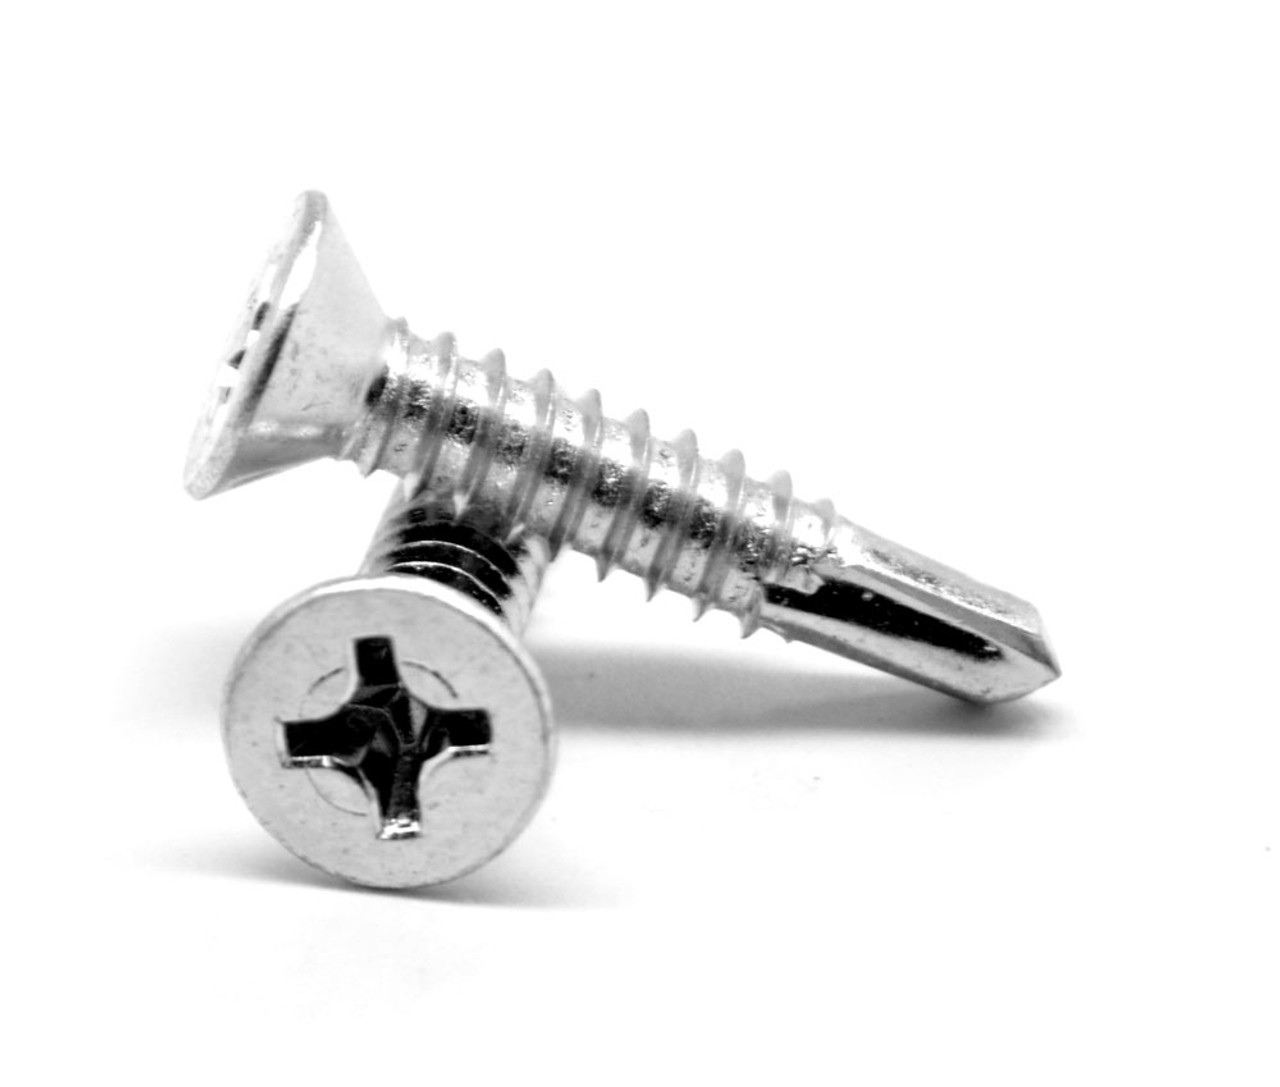 #12-14 x 3/4" (FT) Self Drilling Screws Phillips Flat Head #3 Point Stainless Steel 410